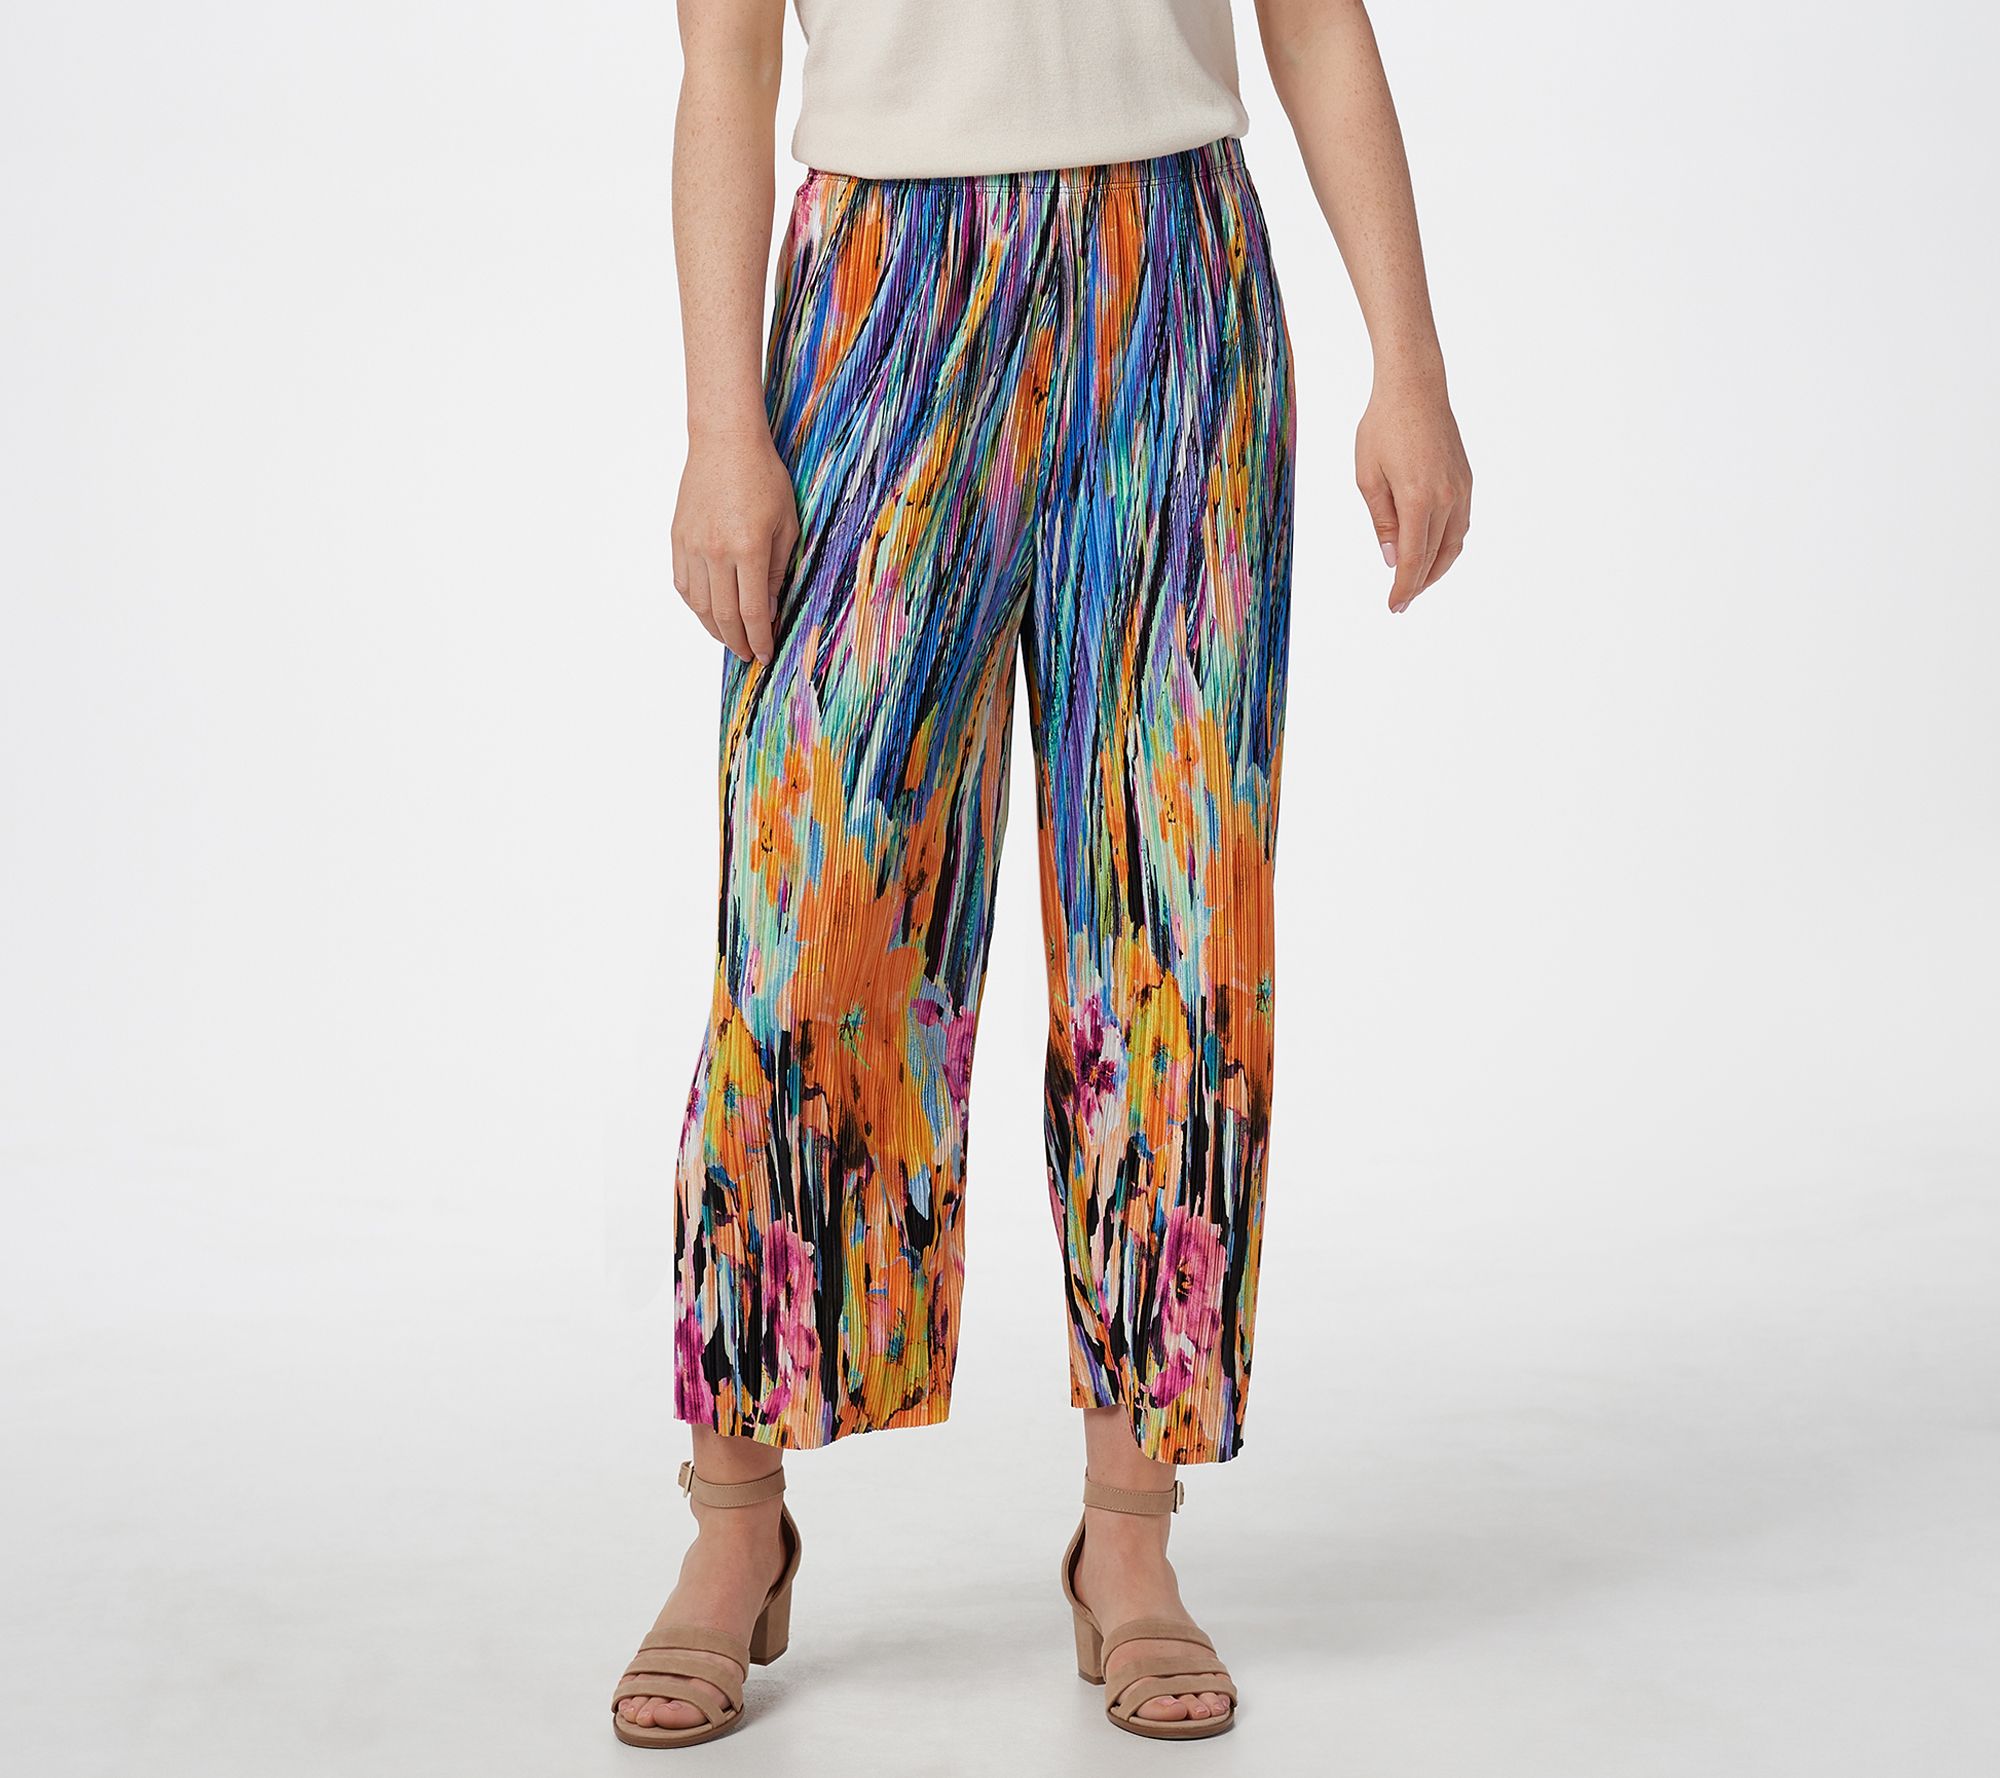 NWOT Susan Graver Printed Pleated Knit Pull-on Crop Pants